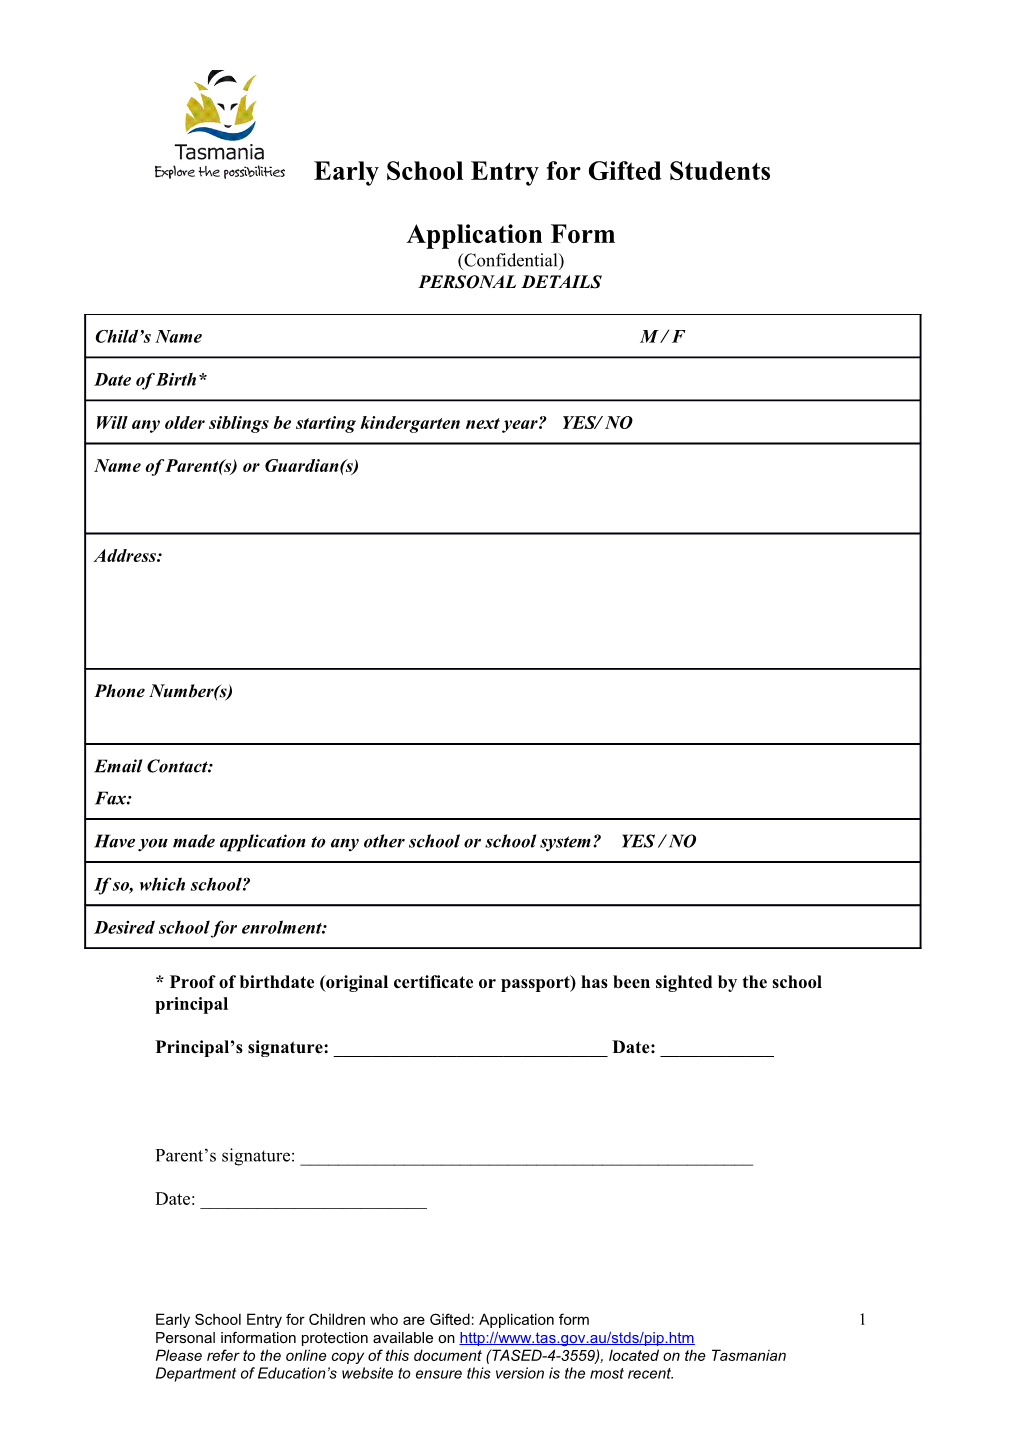 Early School Entry for Gifted Students Application Form